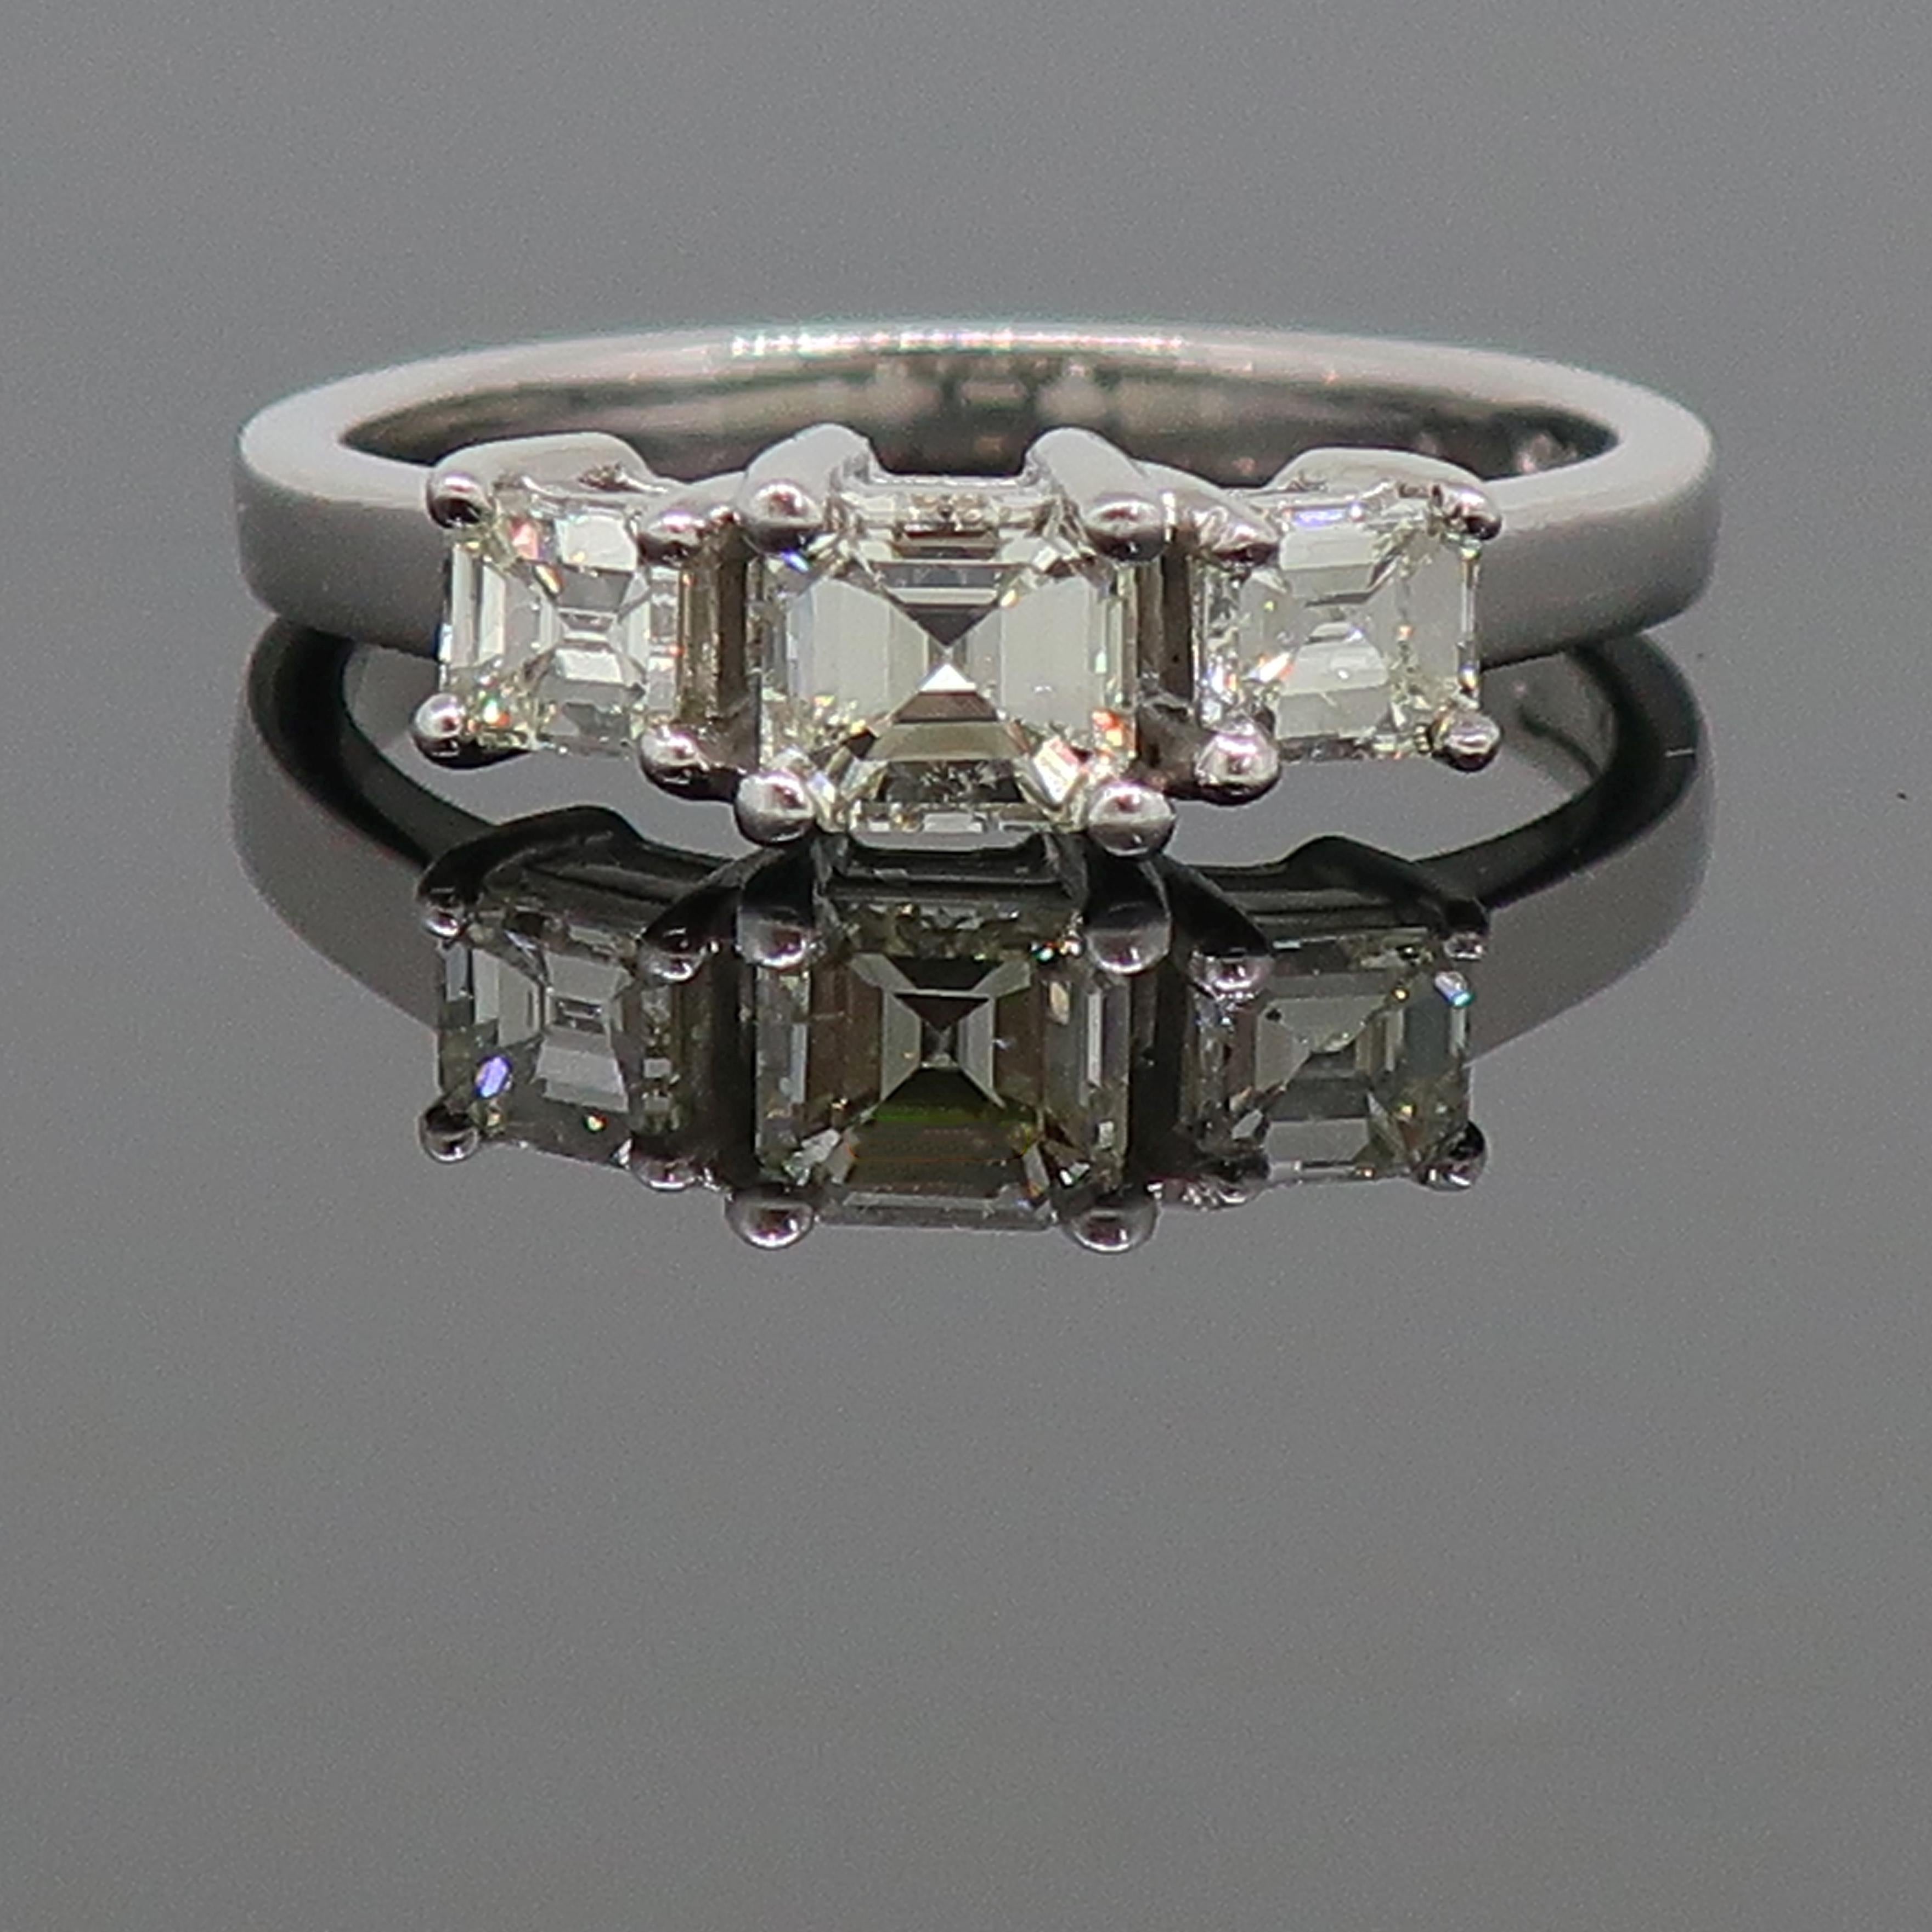 Emerald Cut Diamond Three-Stone Ring 18ct White Gold 0.76ct

A dazzling diamond three stone ring. Consisting of a larger almost square emerald cut stone in the centre, with a smaller almost square emerald cut diamond either side. The diamond in the